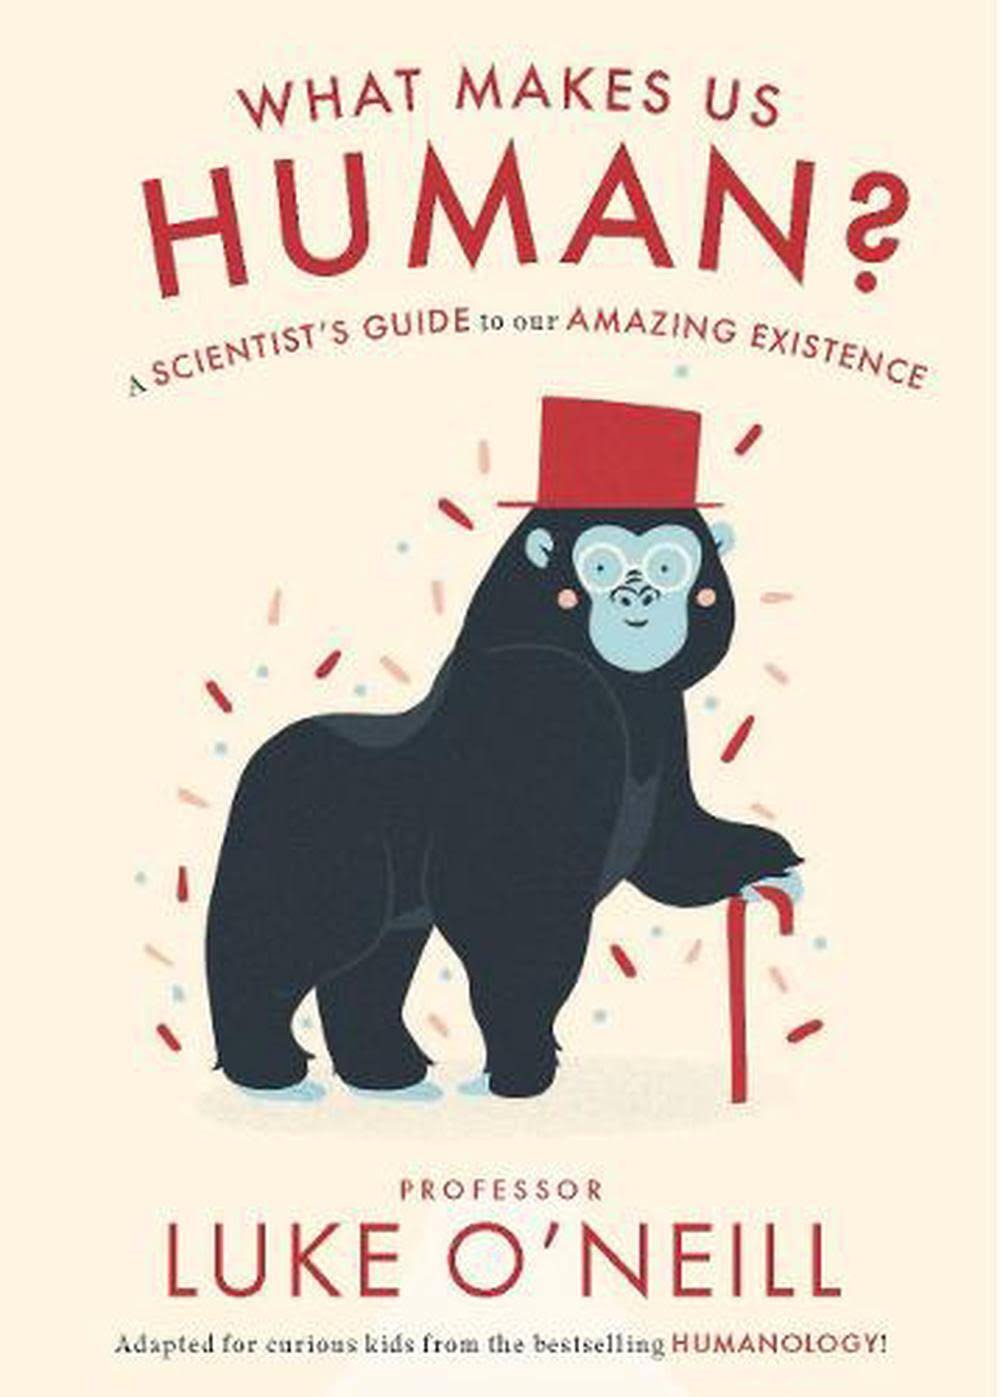 What Make Us Human: A Scientist's Guide to Our Amazing Existence [Book]